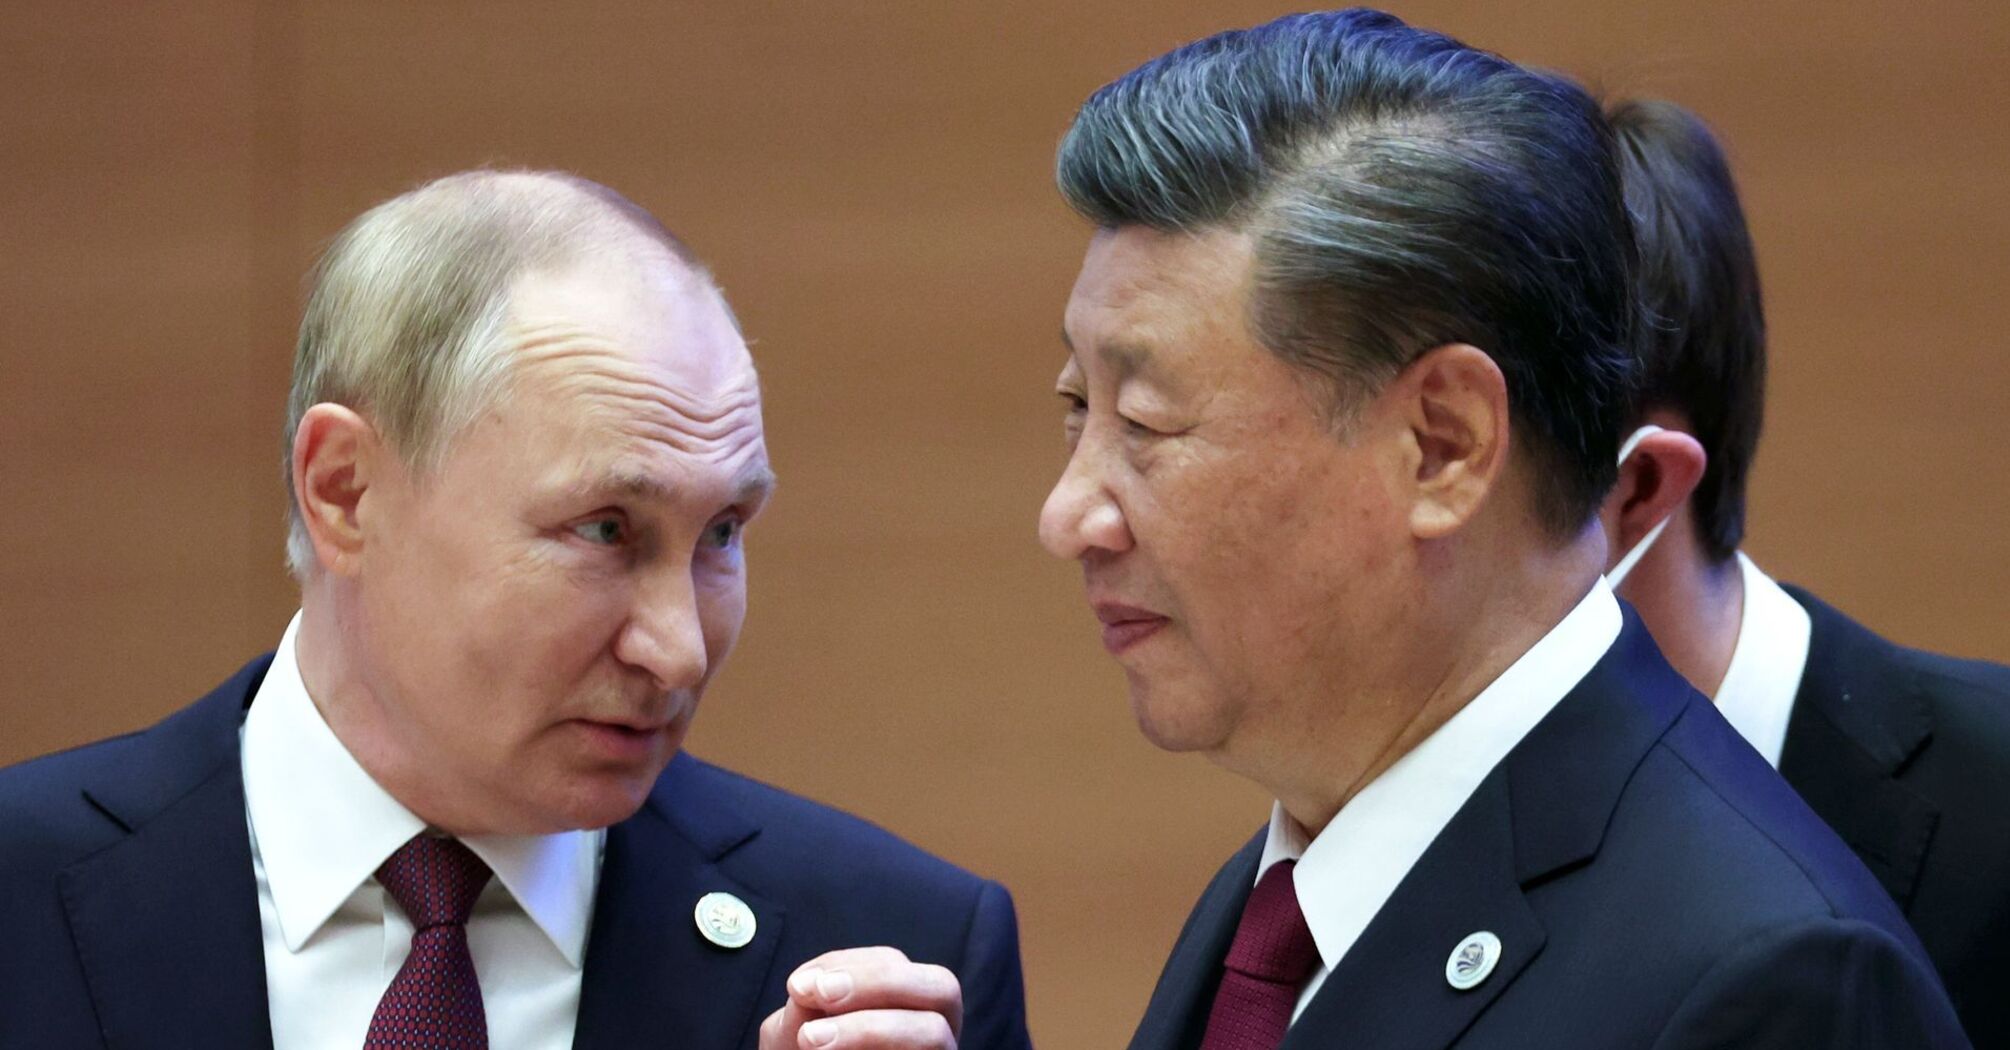 'China's position is consistent': Xi Jinping makes statement on war in Ukraine at meeting with Putin